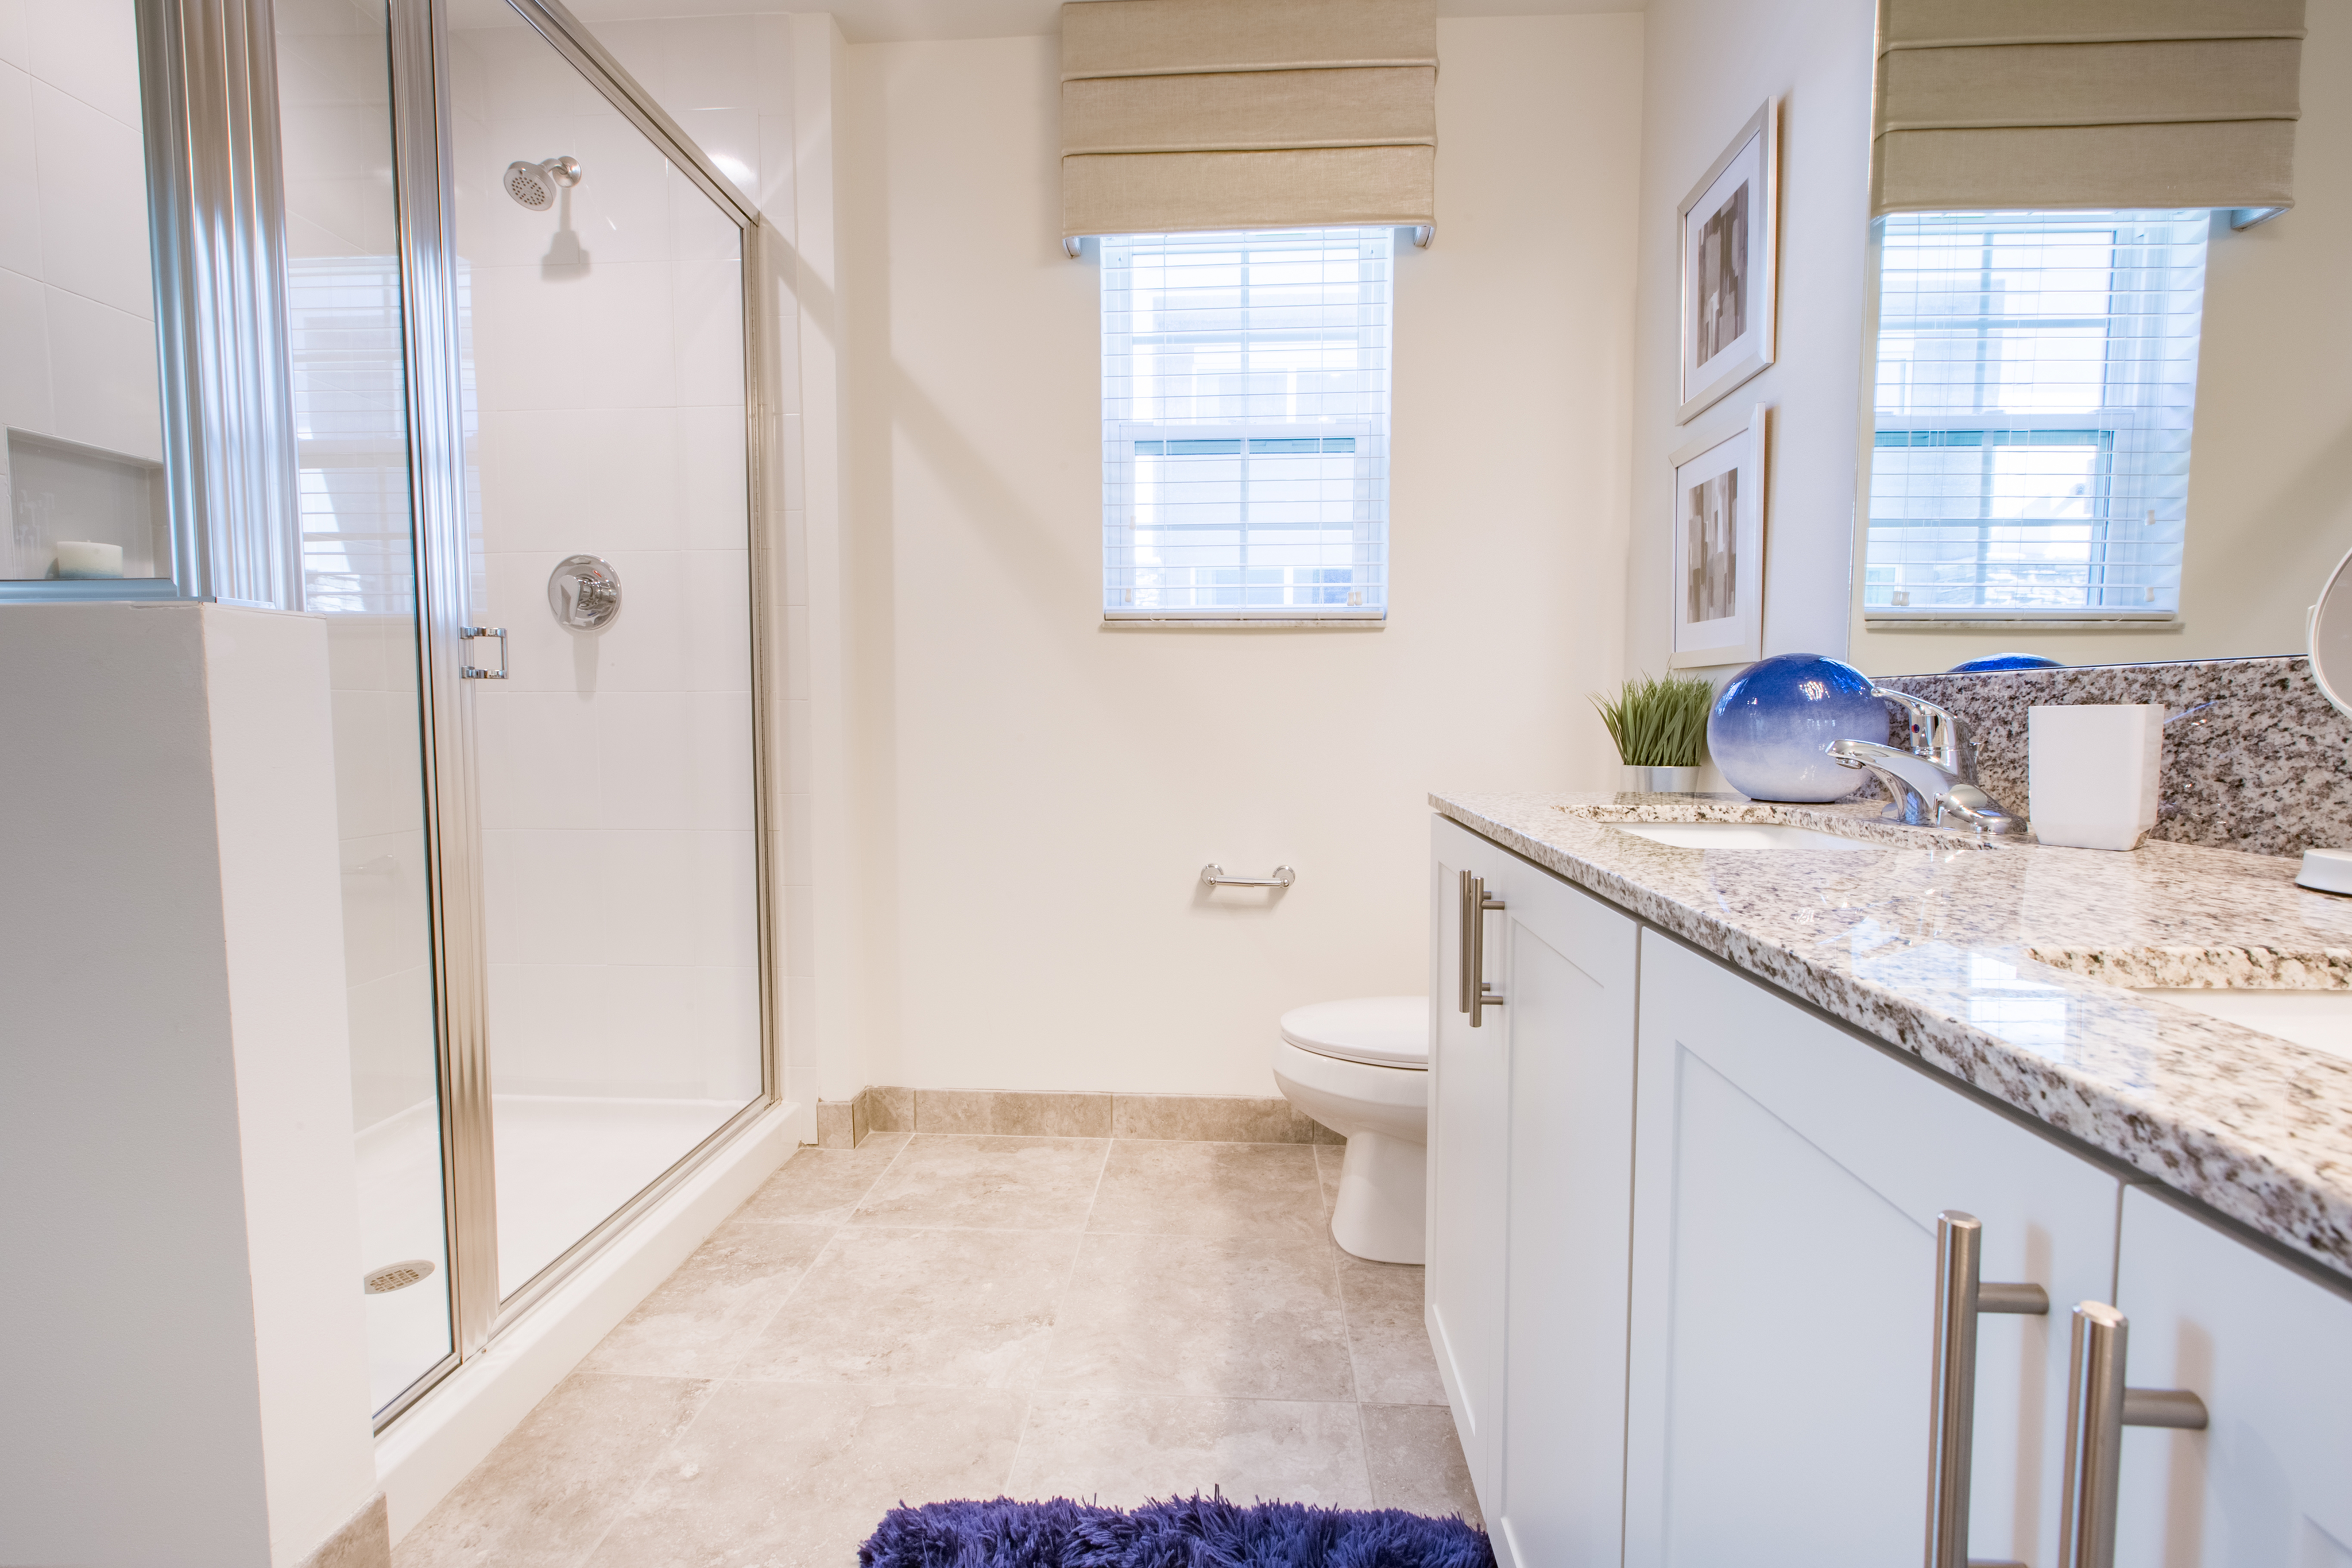 View of Bathroom, Showing Walk-In Shower, Granite Countertop, and Double Sinks at Cottonwood West Palm Apartments